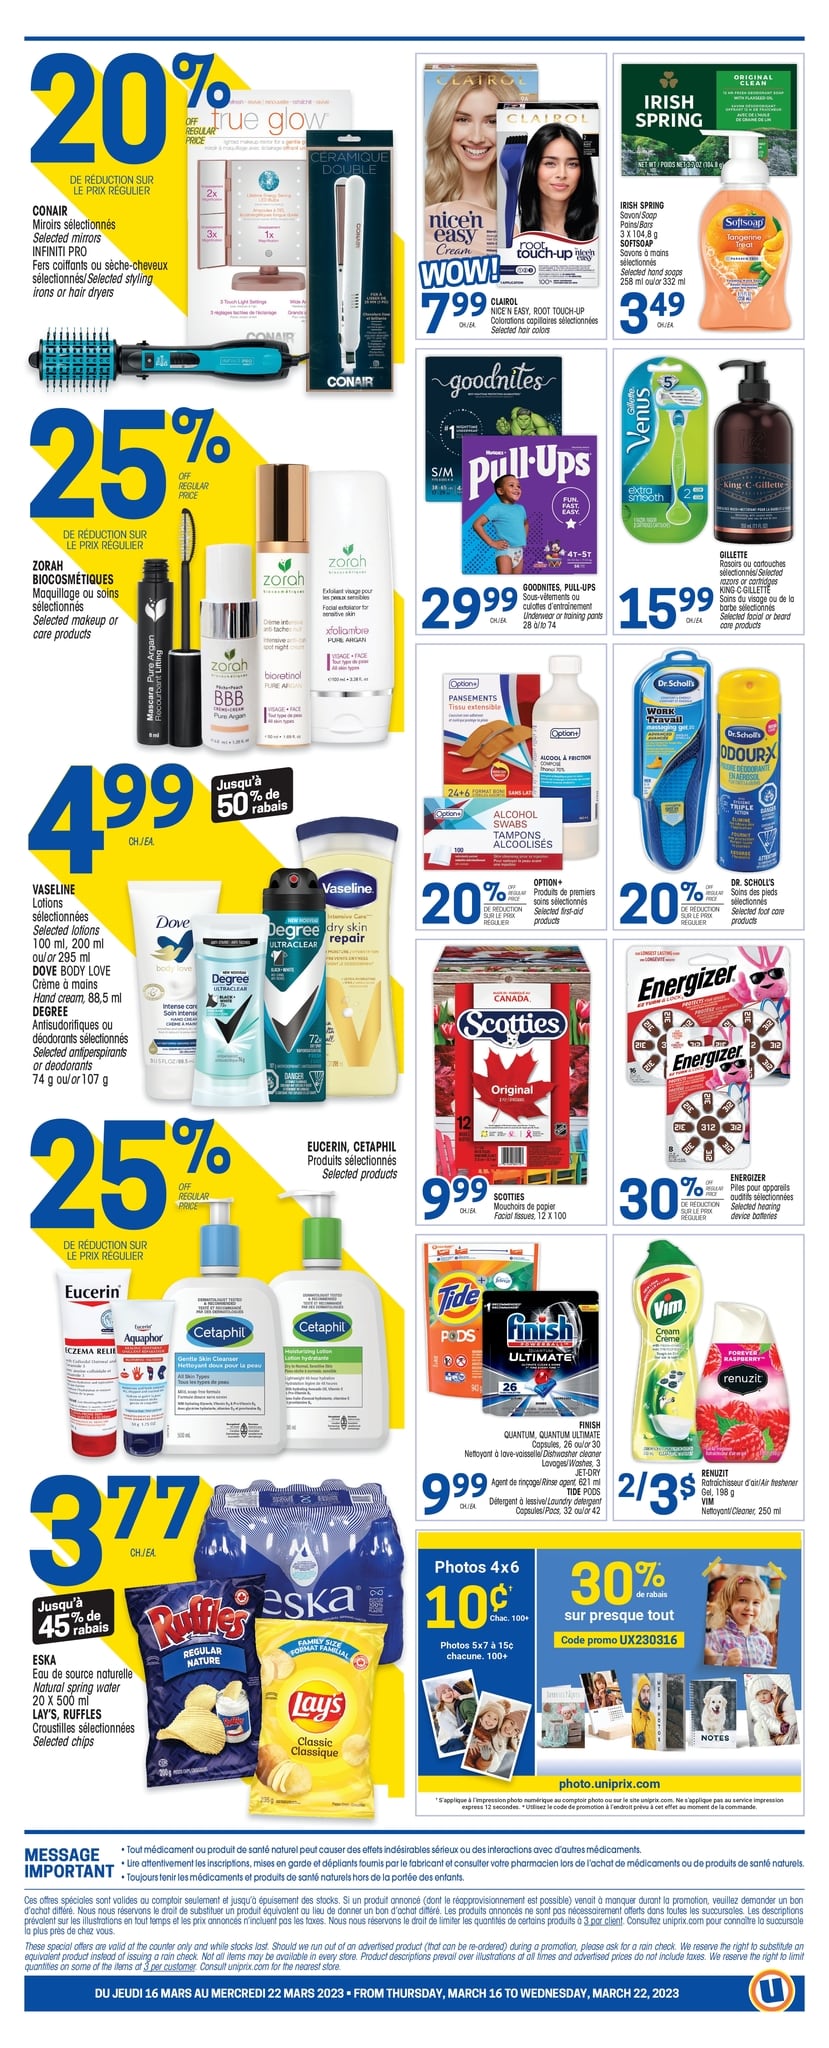 Uniprix - Weekly Flyer Specials - Page 2